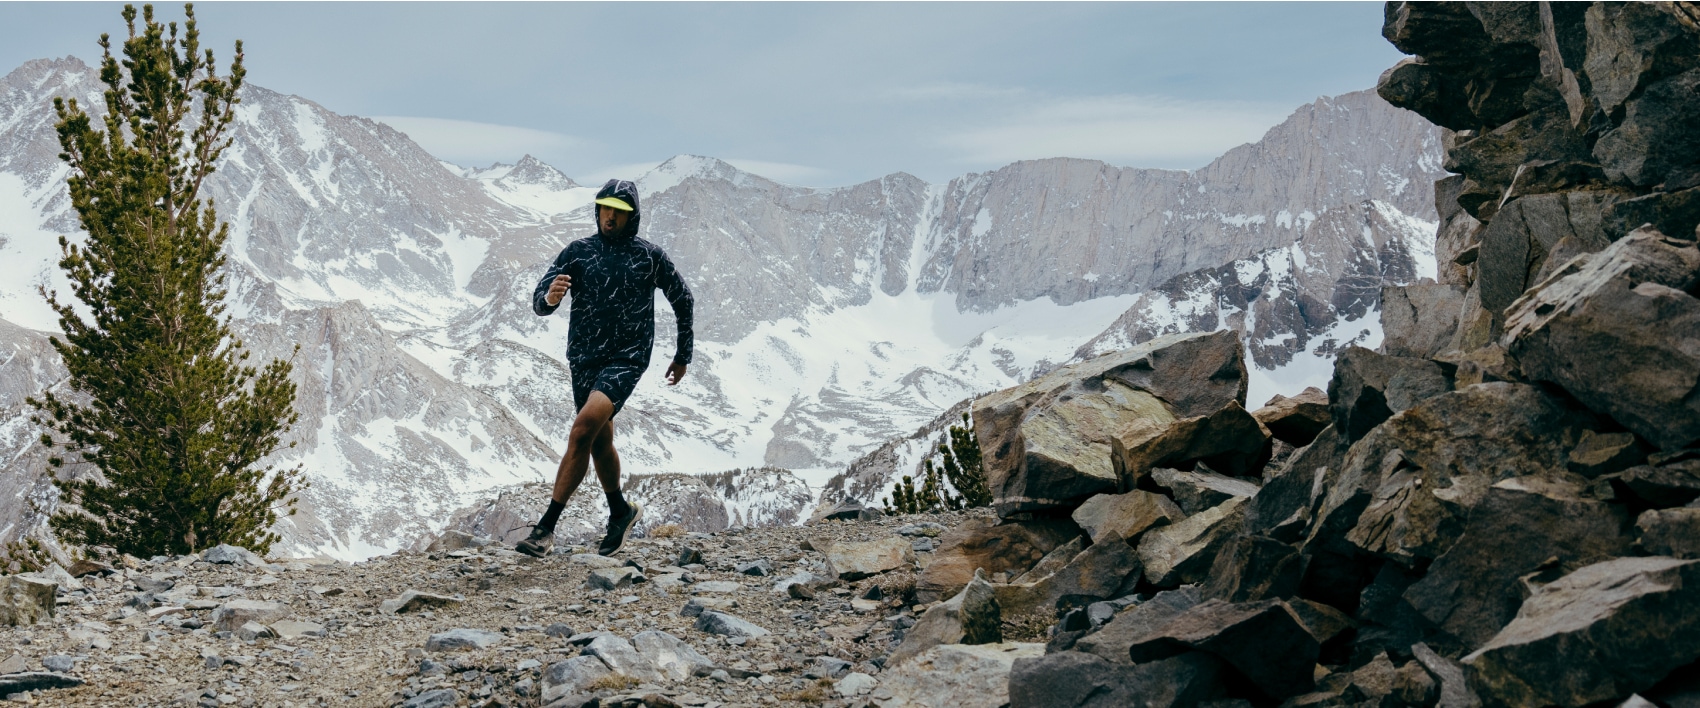 Aum running through the cold mountains wearing Merrell gear, looking fast.